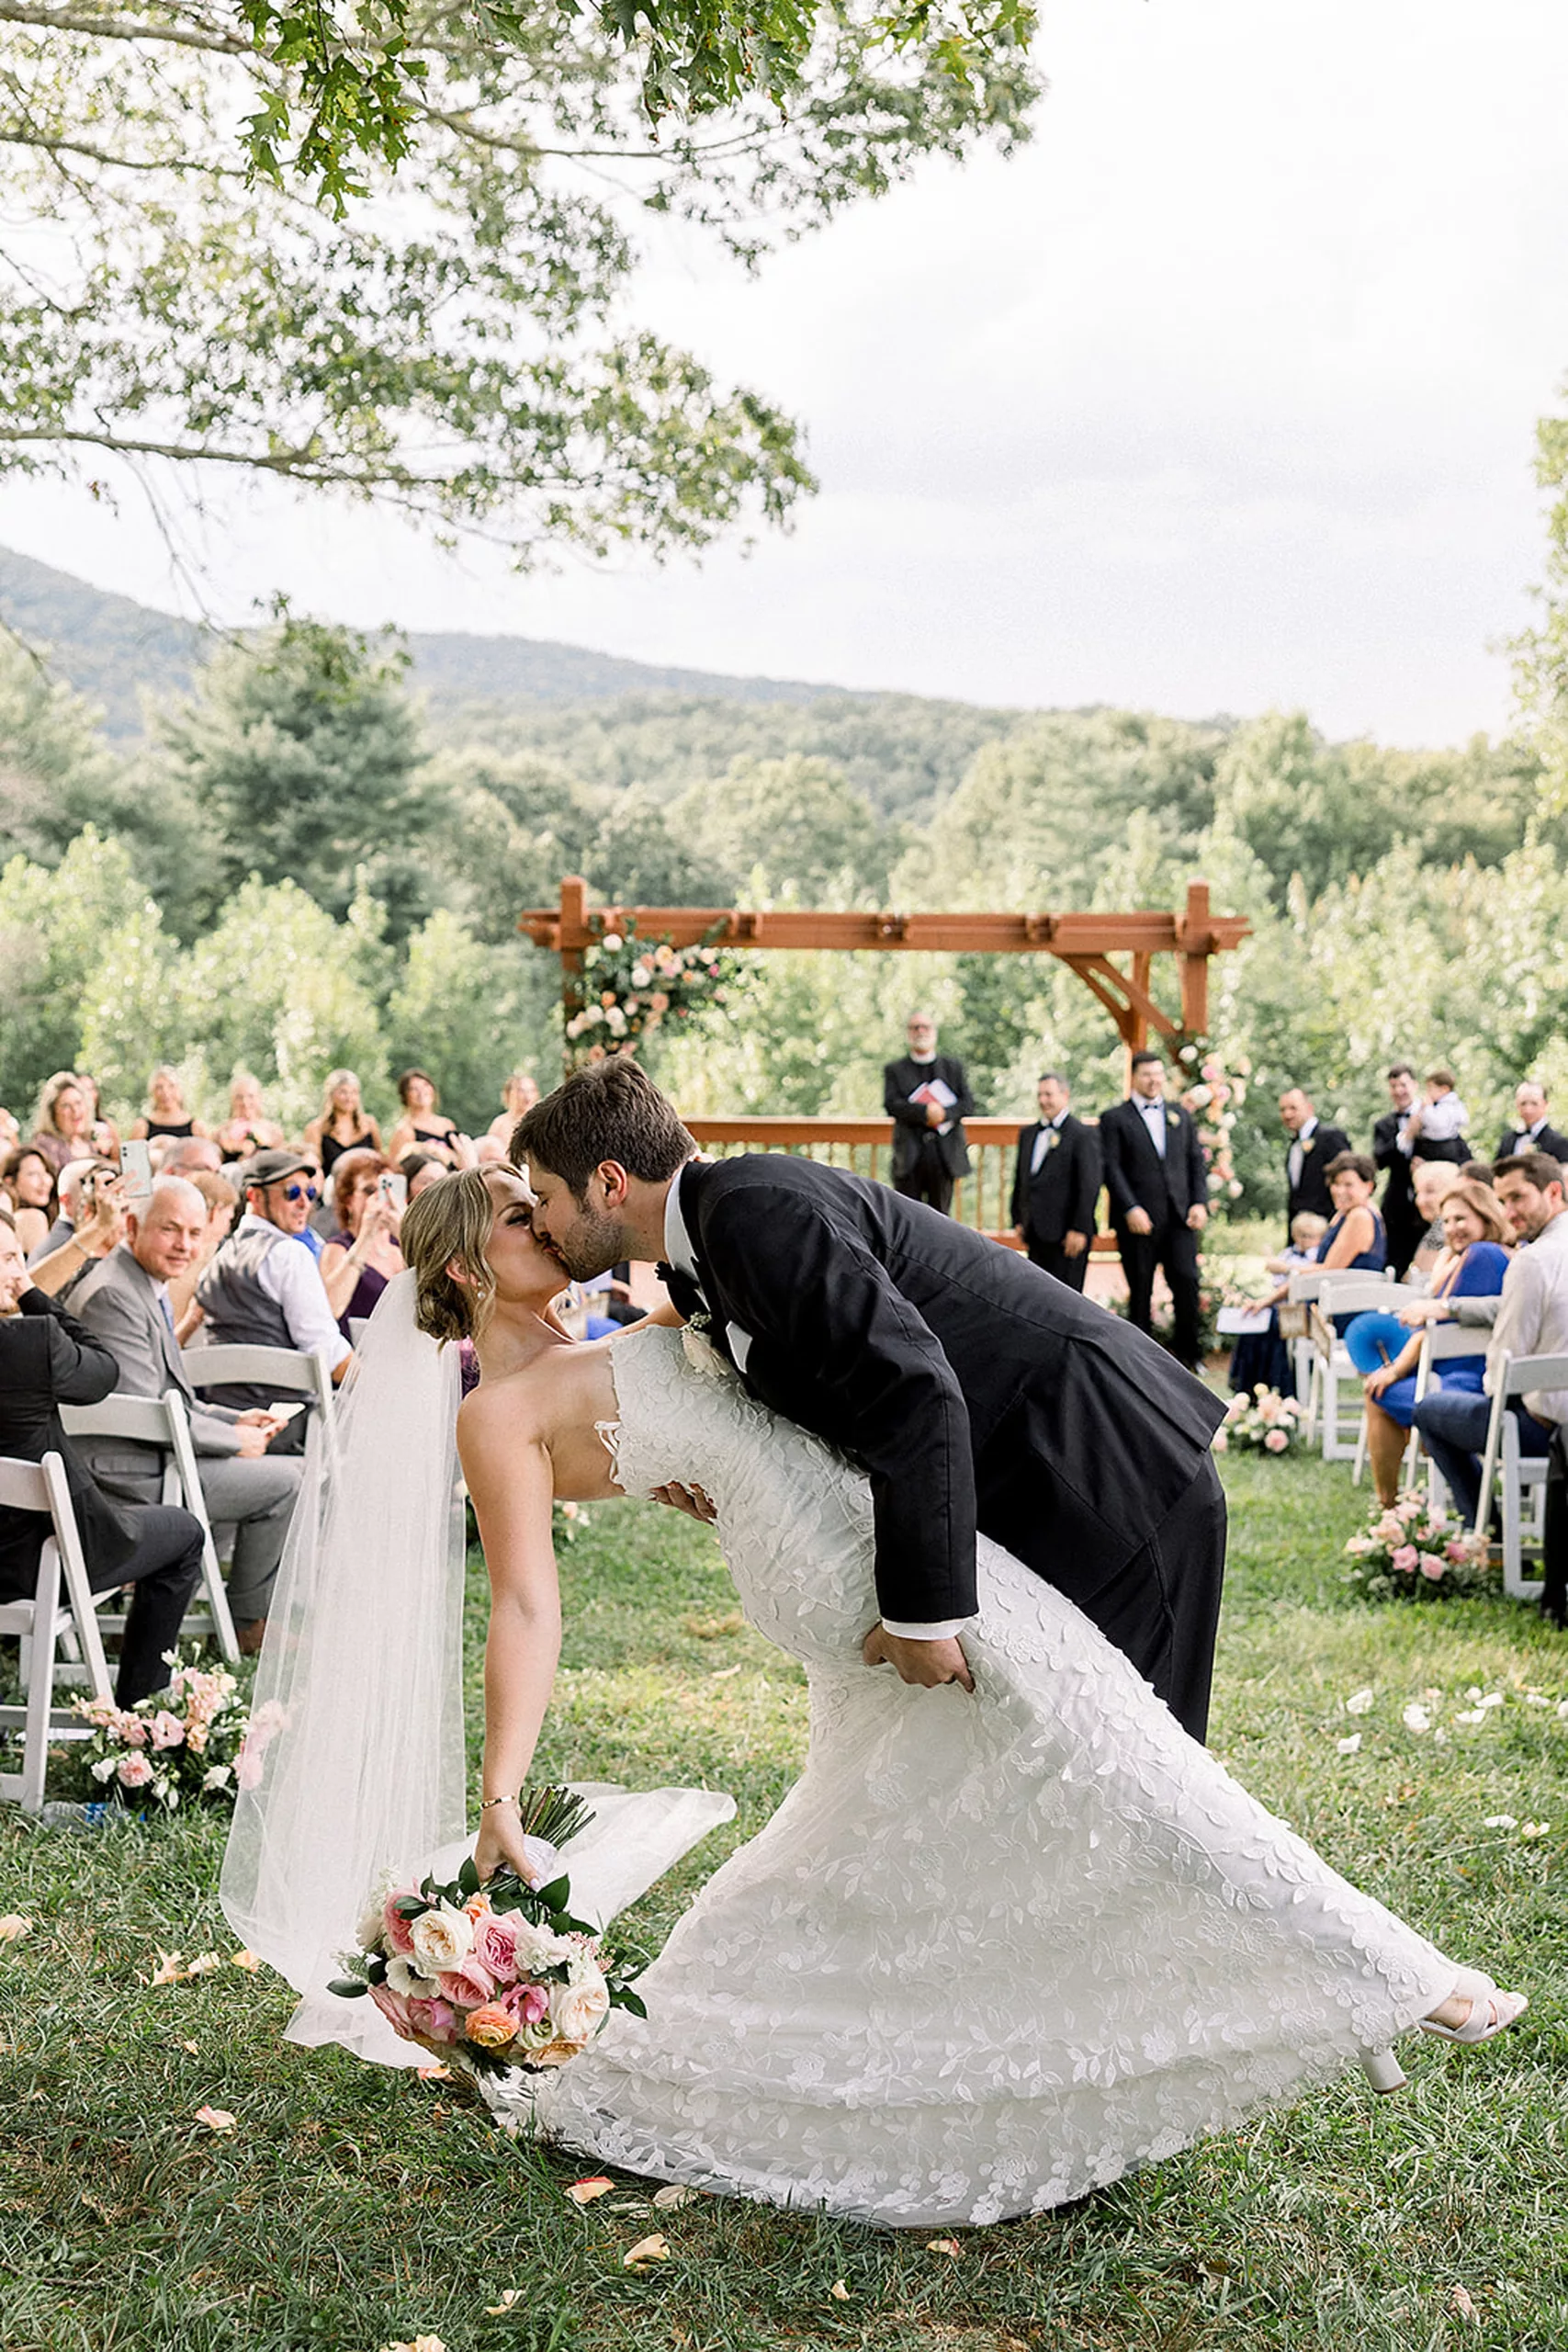 Newlyweds kiss at the end of the aisle following their ceremony with guests looking on from their chairs at an outdoor White Oaks Vineyard wedding ceremony